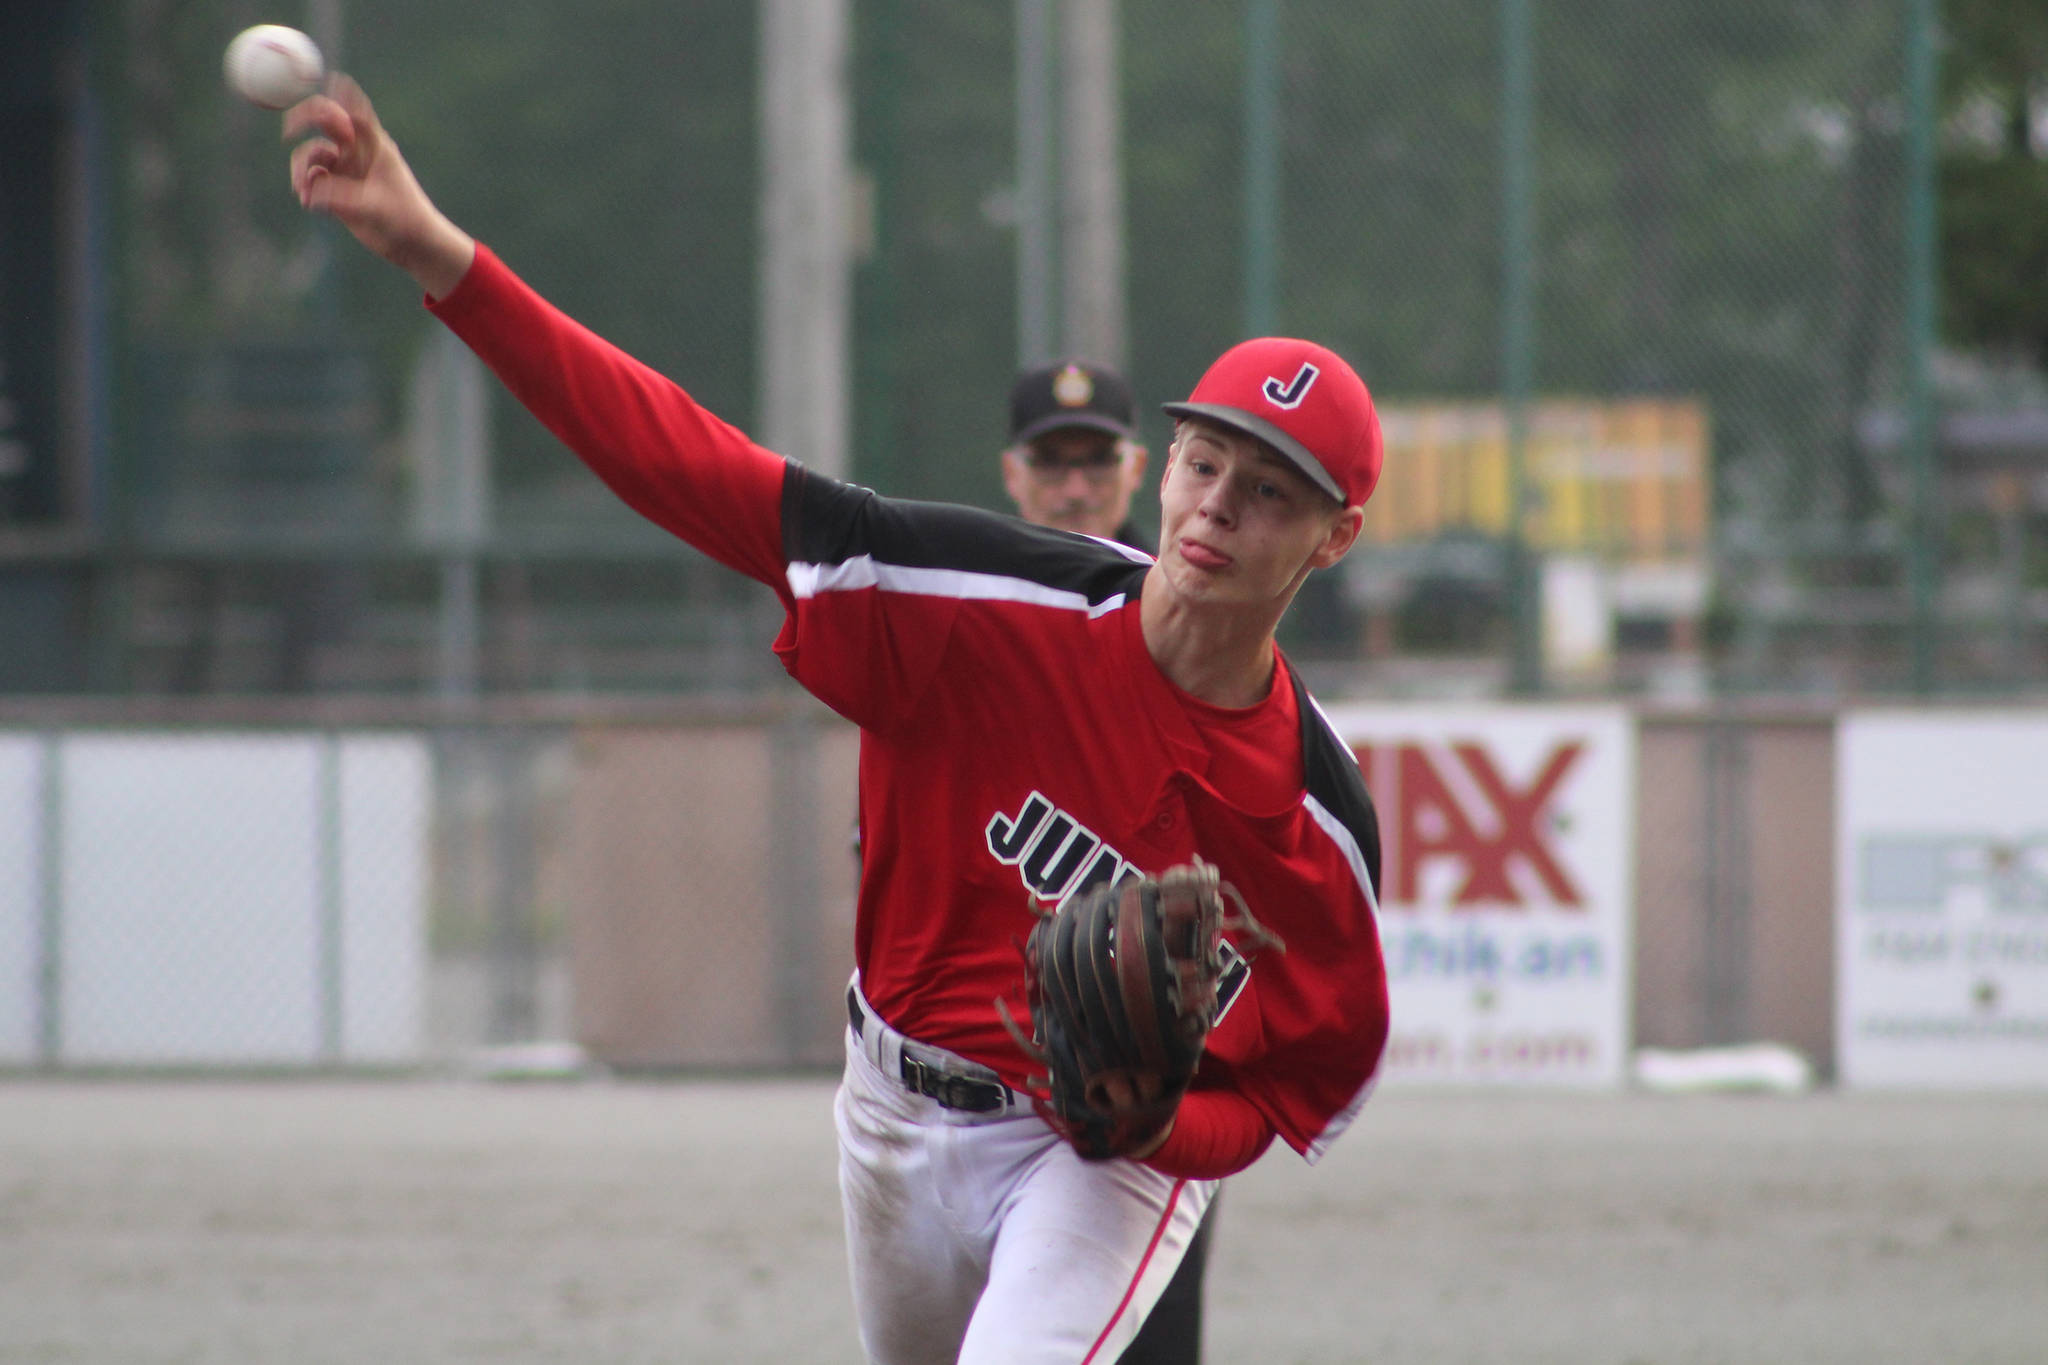 Juneau All-Stars pitcher Kaleb Campbell pitches against Ketchikan in Game 2 of Alaska Little League Junior Baseball State Tournament at Norman Walker Field in Ketchikan on Thursday, July 18, 2019. Juneau won 14-4. (Courtesy Photo | Lori Crupi)